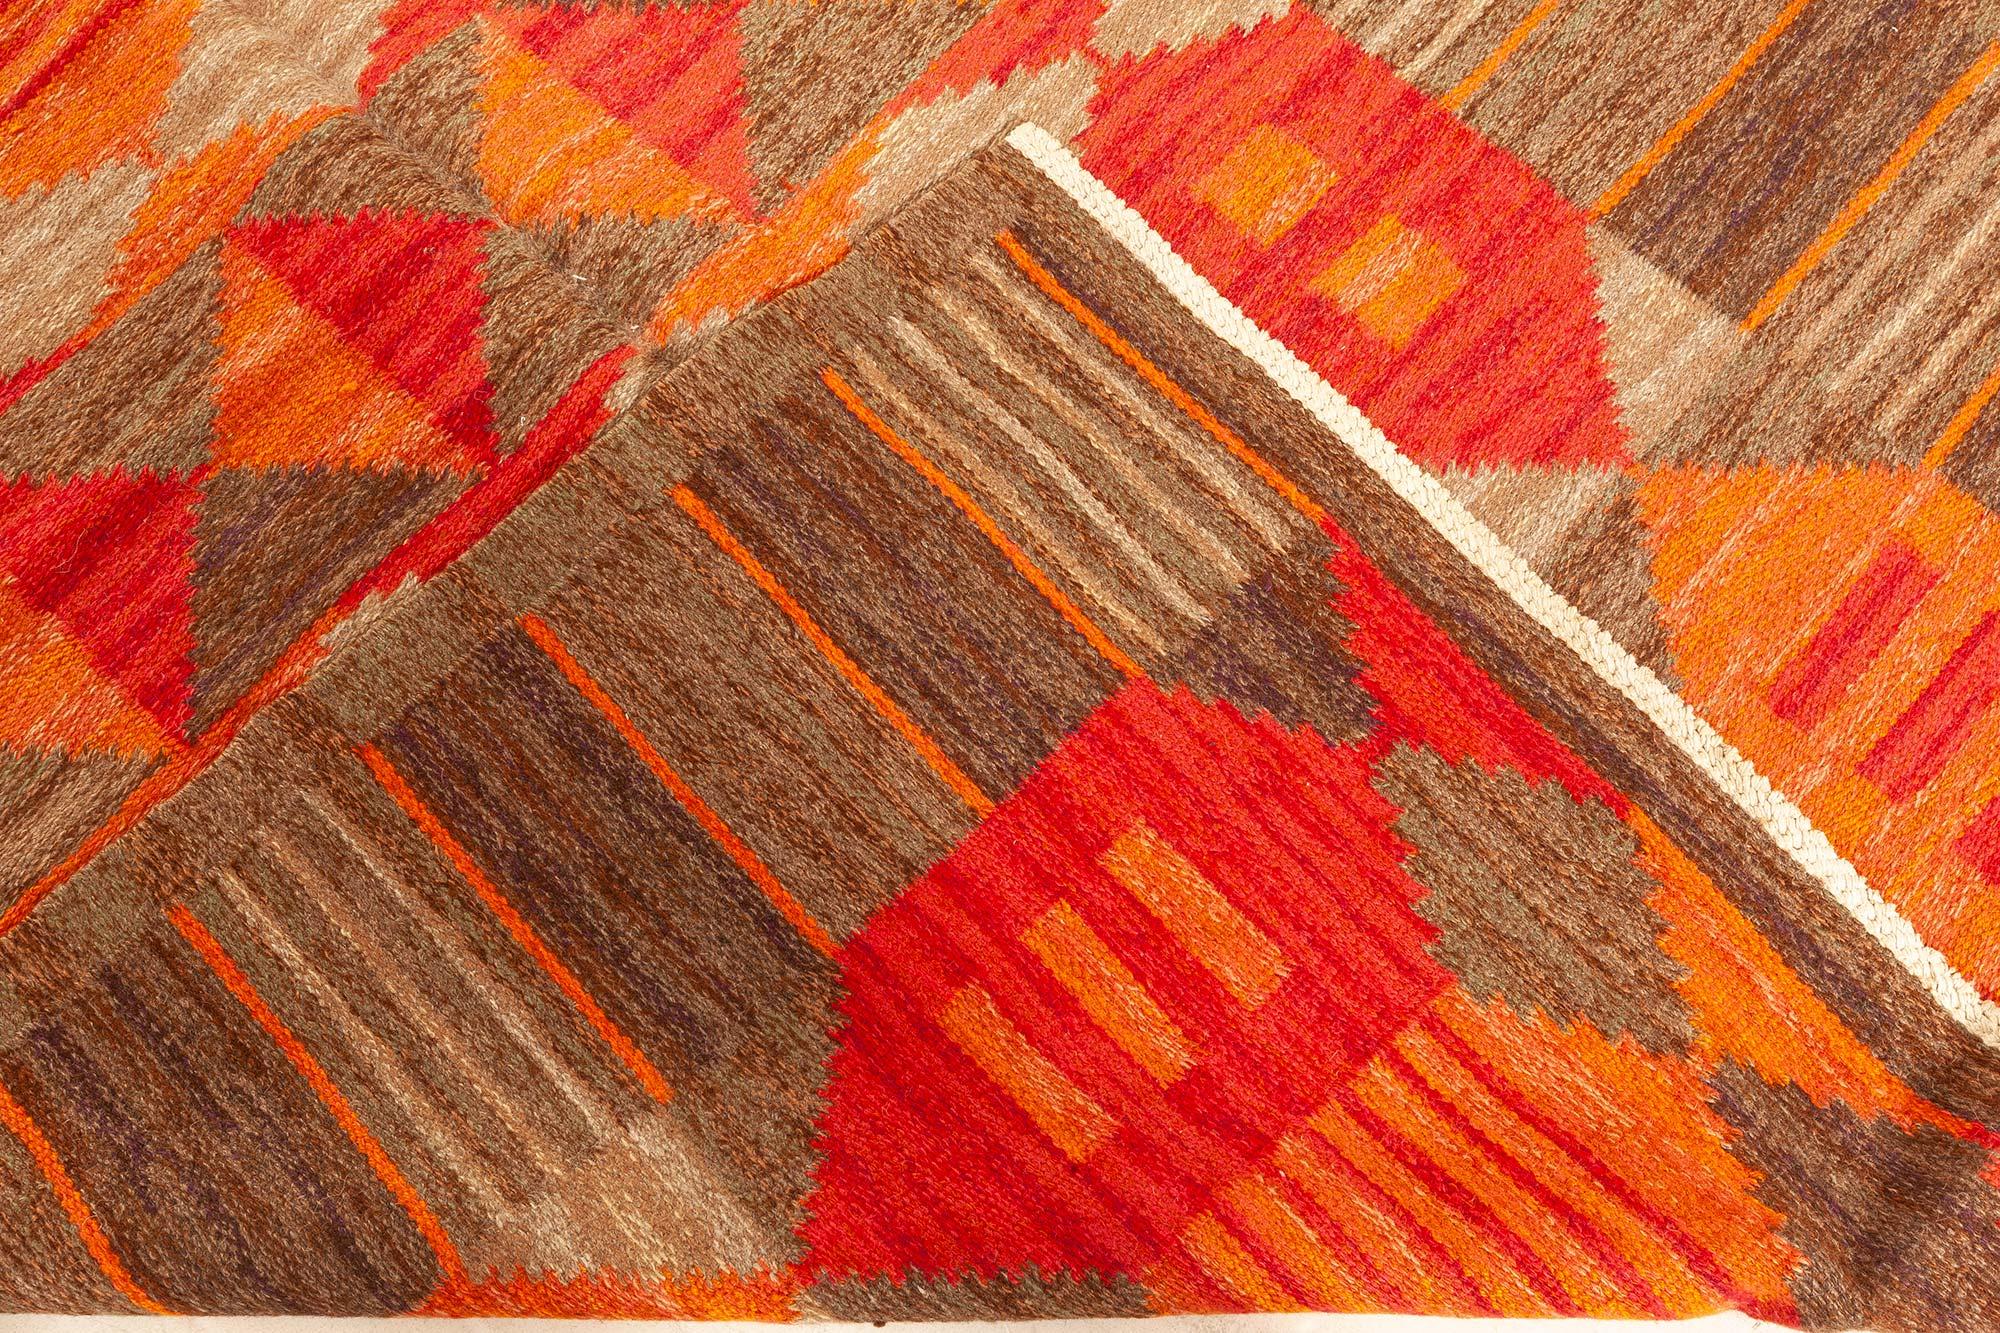 20th Century Midcentury Swedish Flat-Woven Rug by Karin Jönsson For Sale